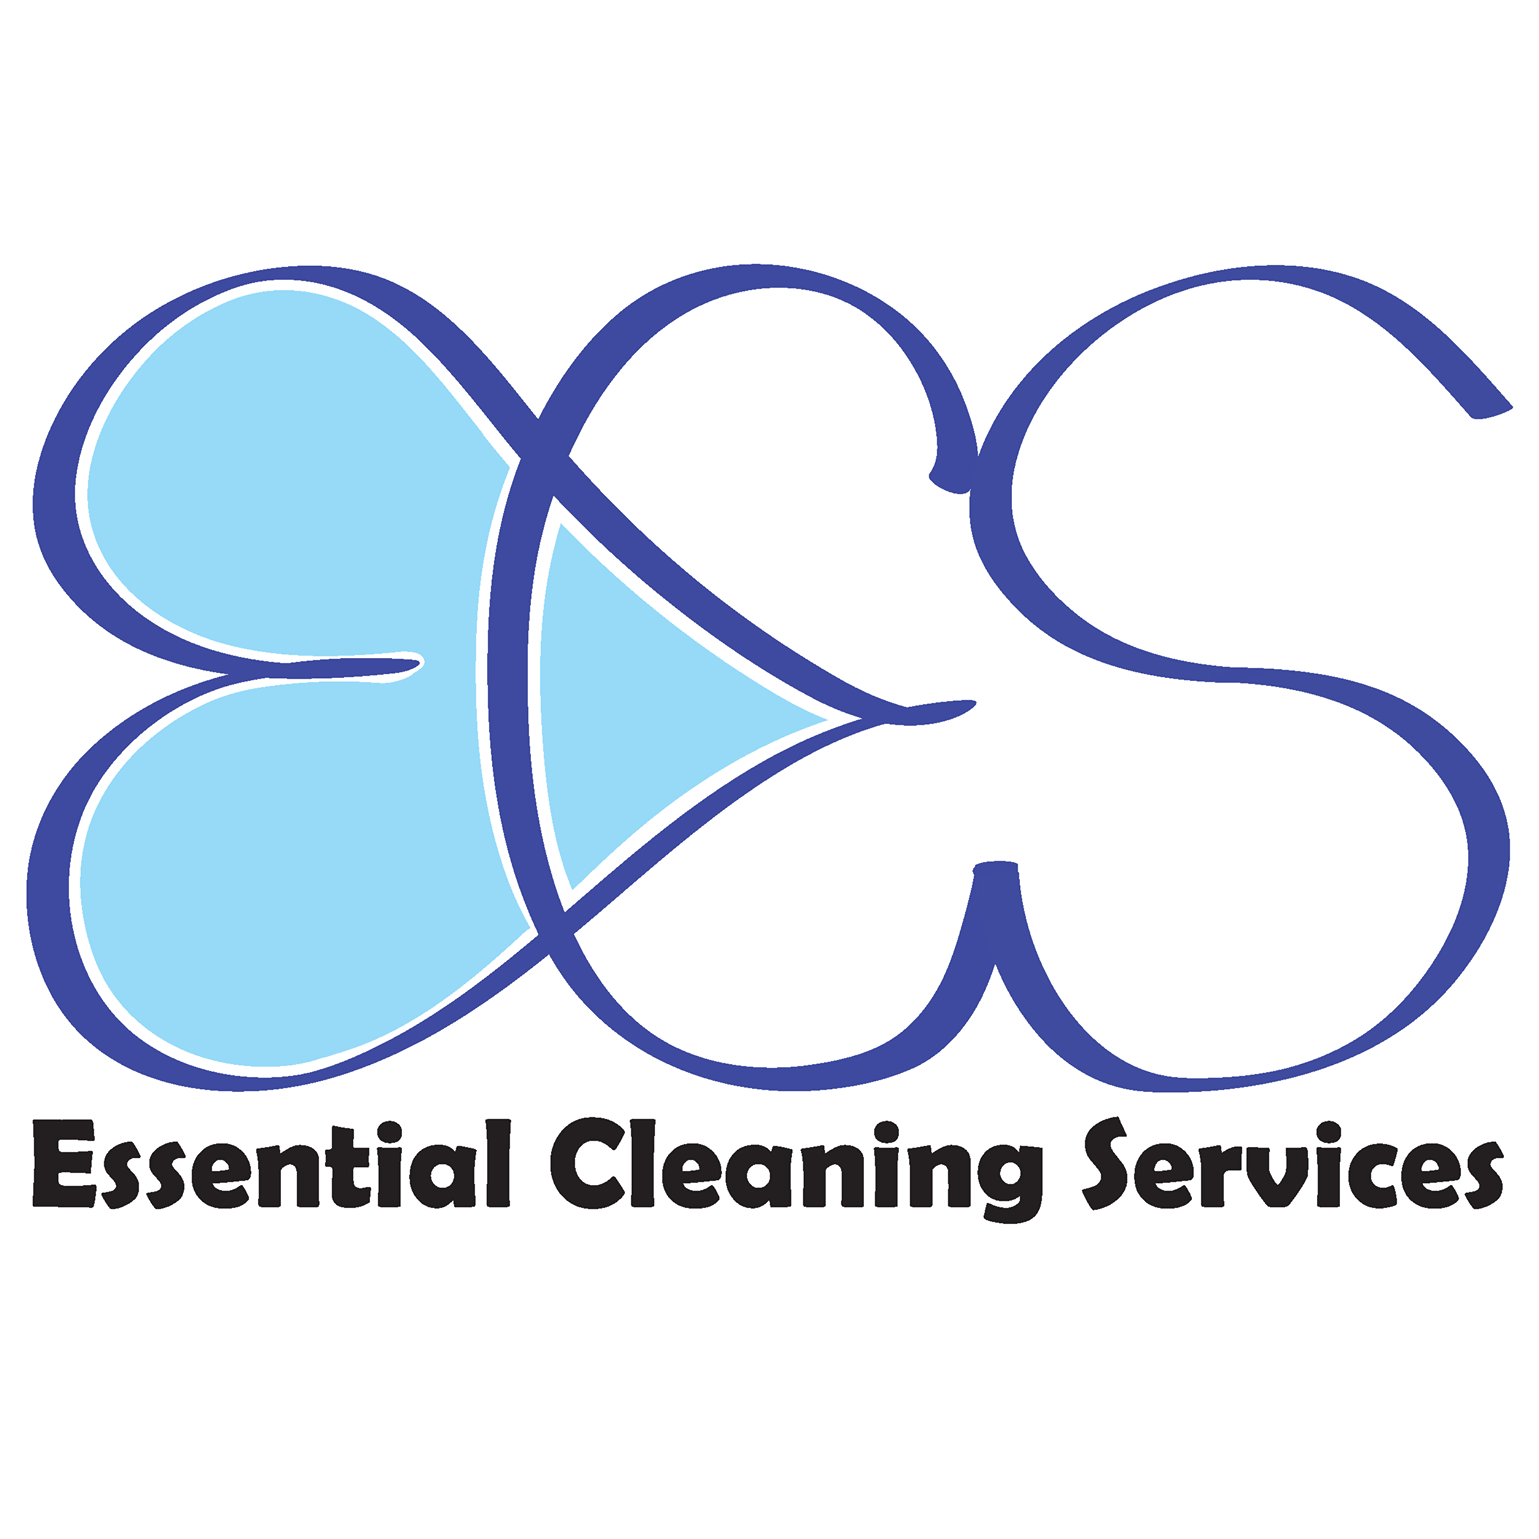 Essential Cleaning's logo